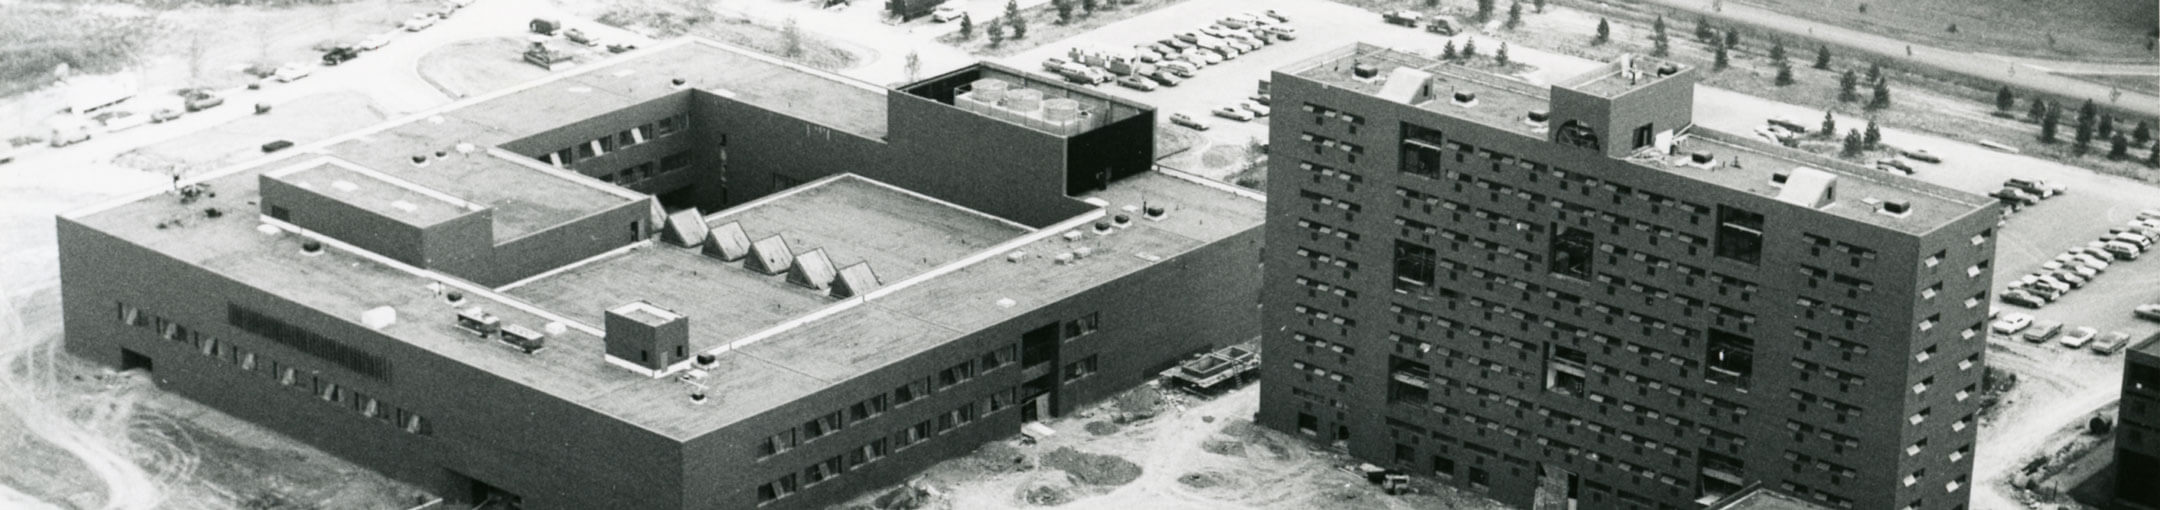 1974 aerial photo of the NTID academic building and resident hall